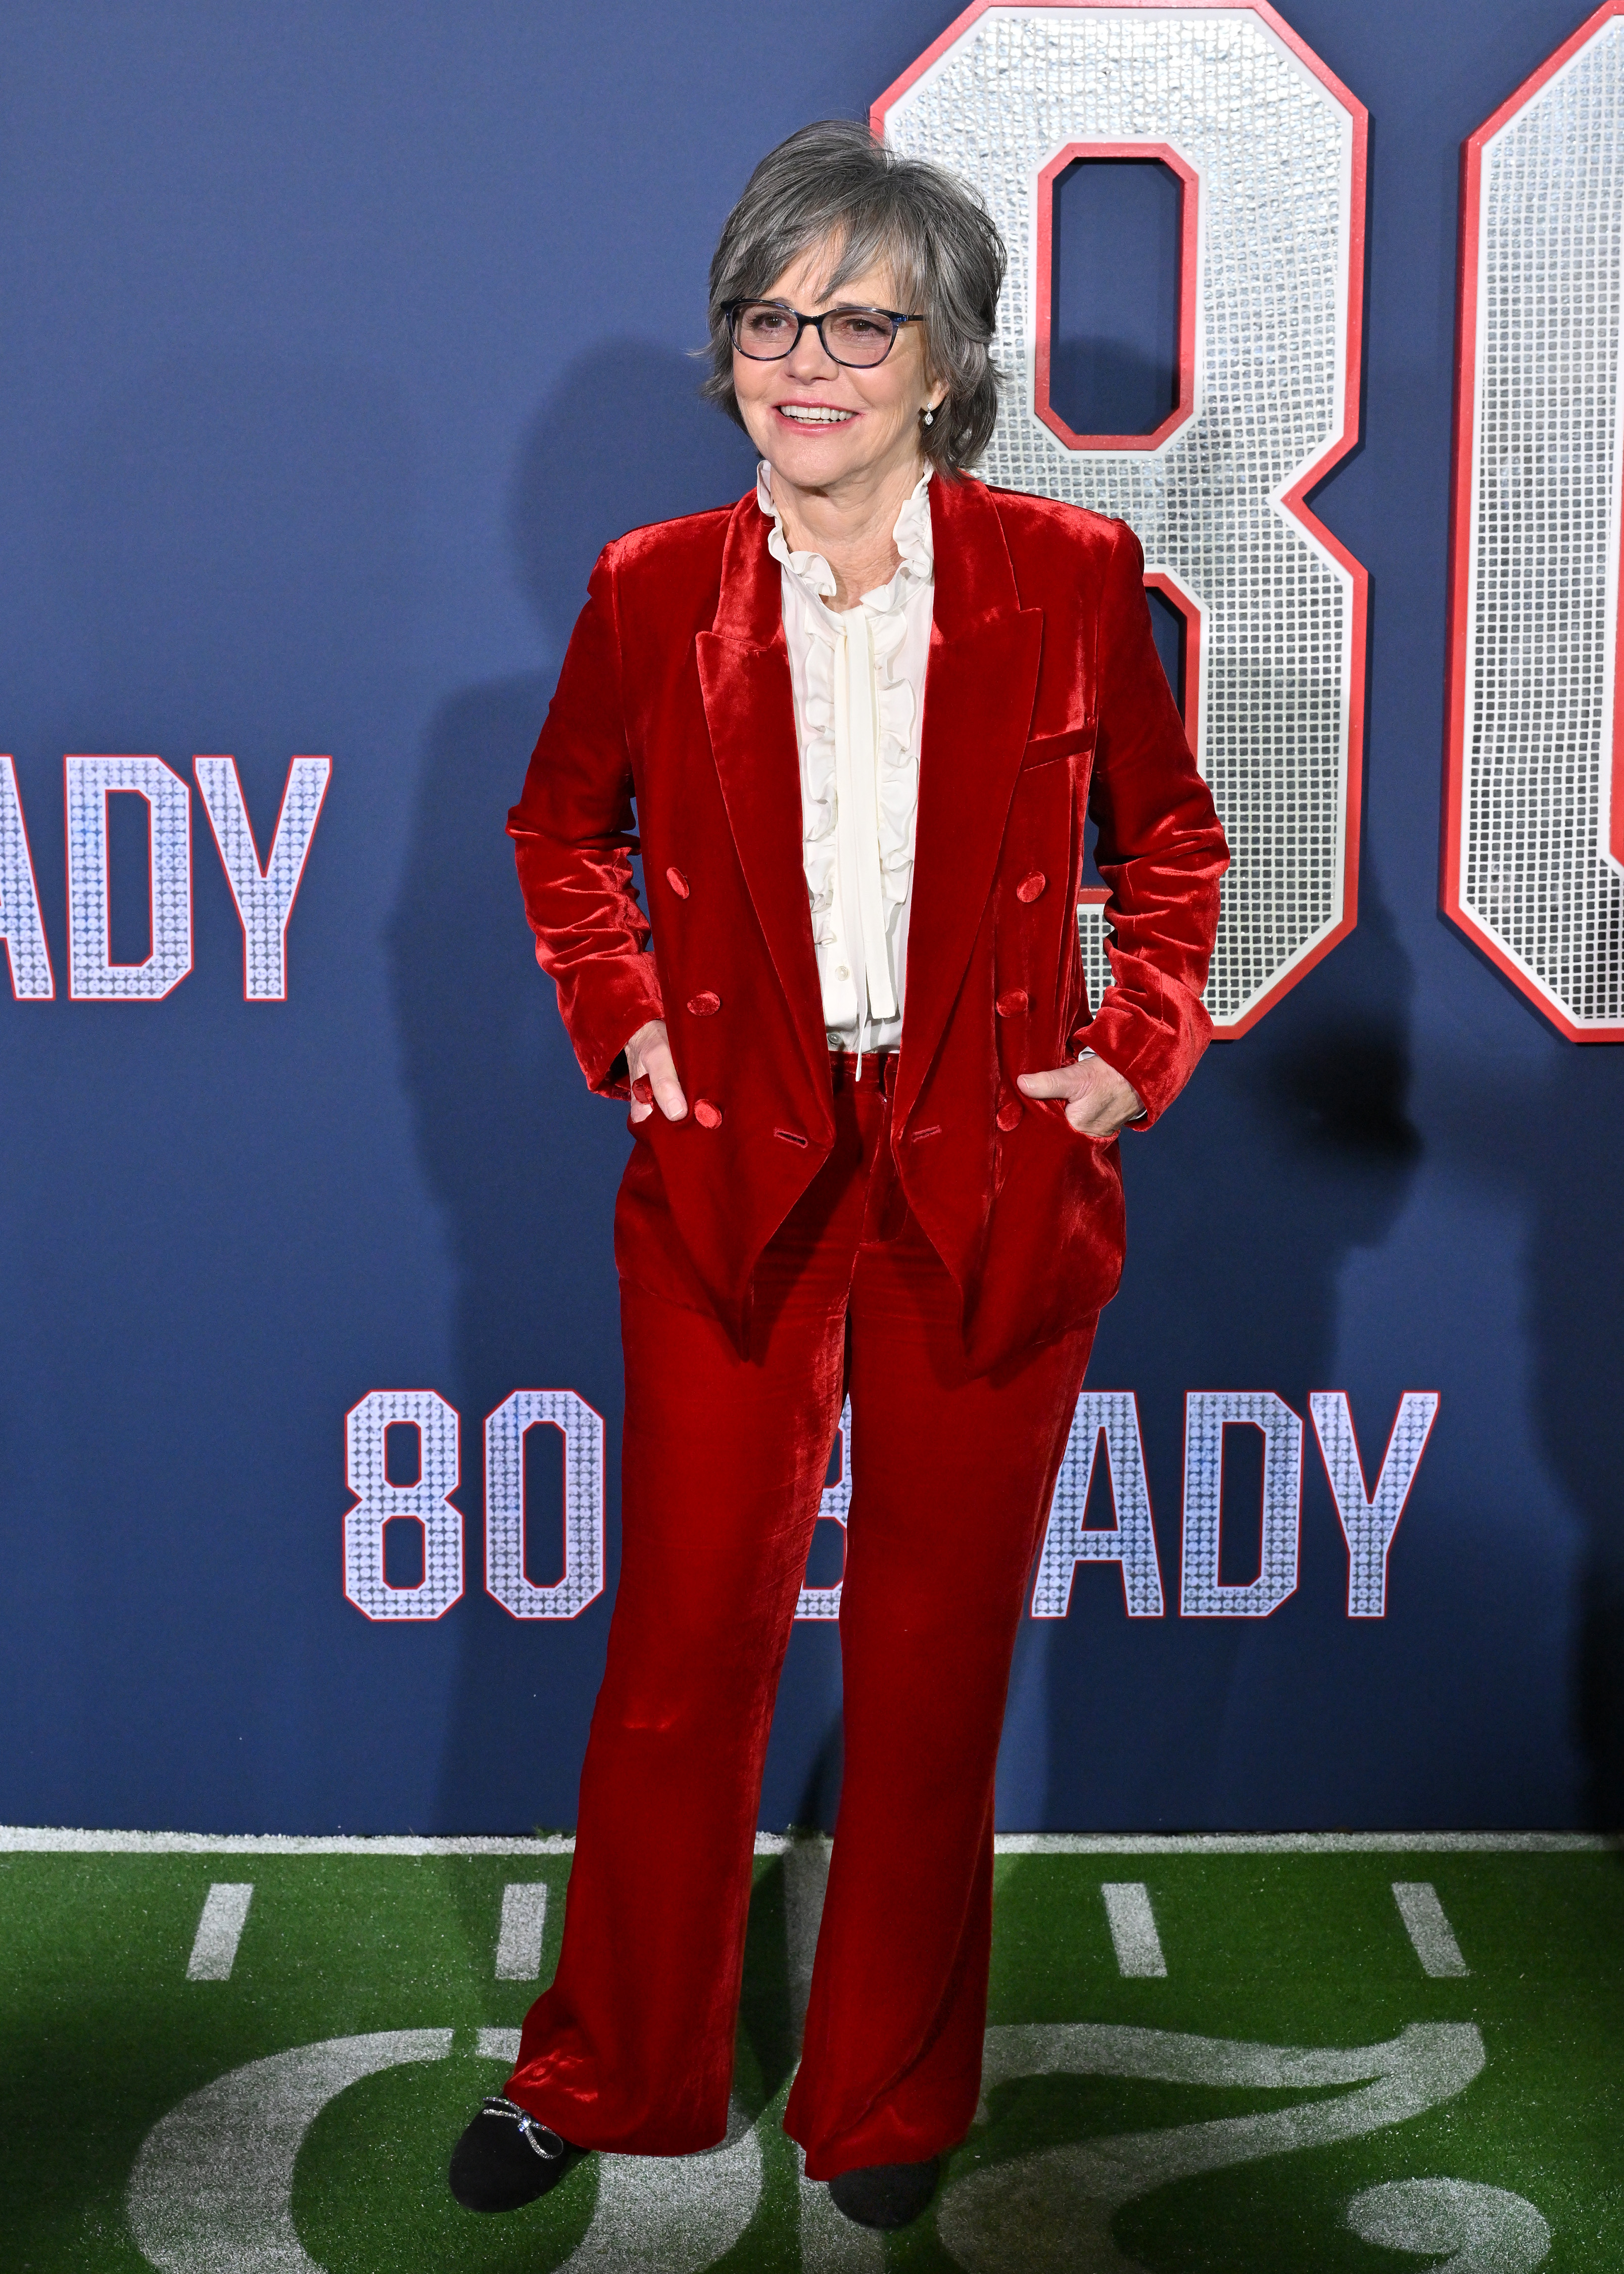 Sally Field attends the Los Angeles premiere of Paramount Pictures' "80 For Brady" at Regency Village Theatre on January 31, 2023, in Los Angeles, California. | Source: Getty Images